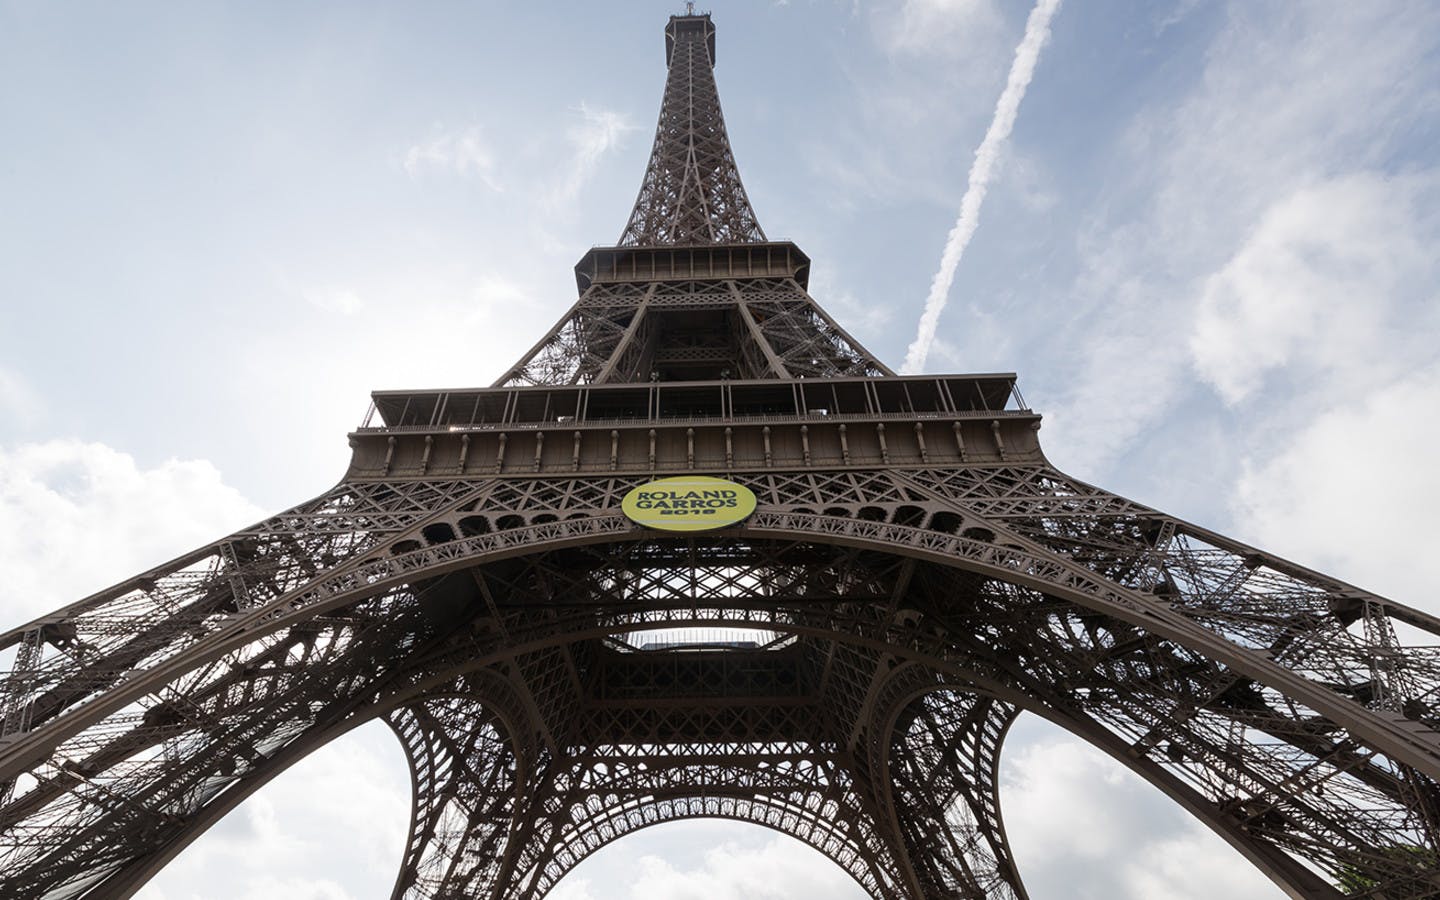 how far is roland garros from the eiffel tower